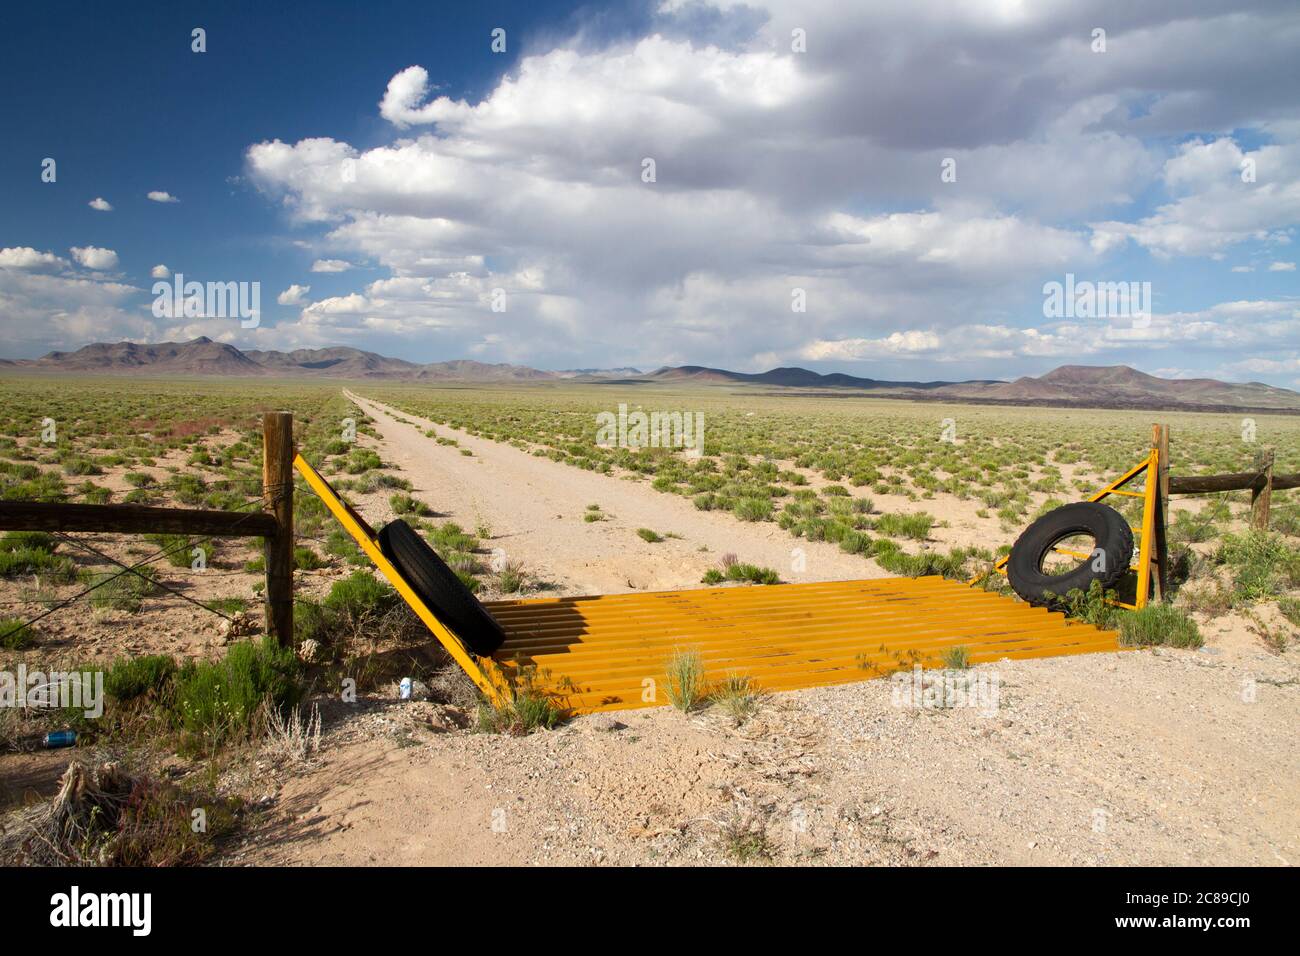 Gold colored cattle guard on a dirt road in the Basin and Range desert of Nye County, Nevada Stock Photo